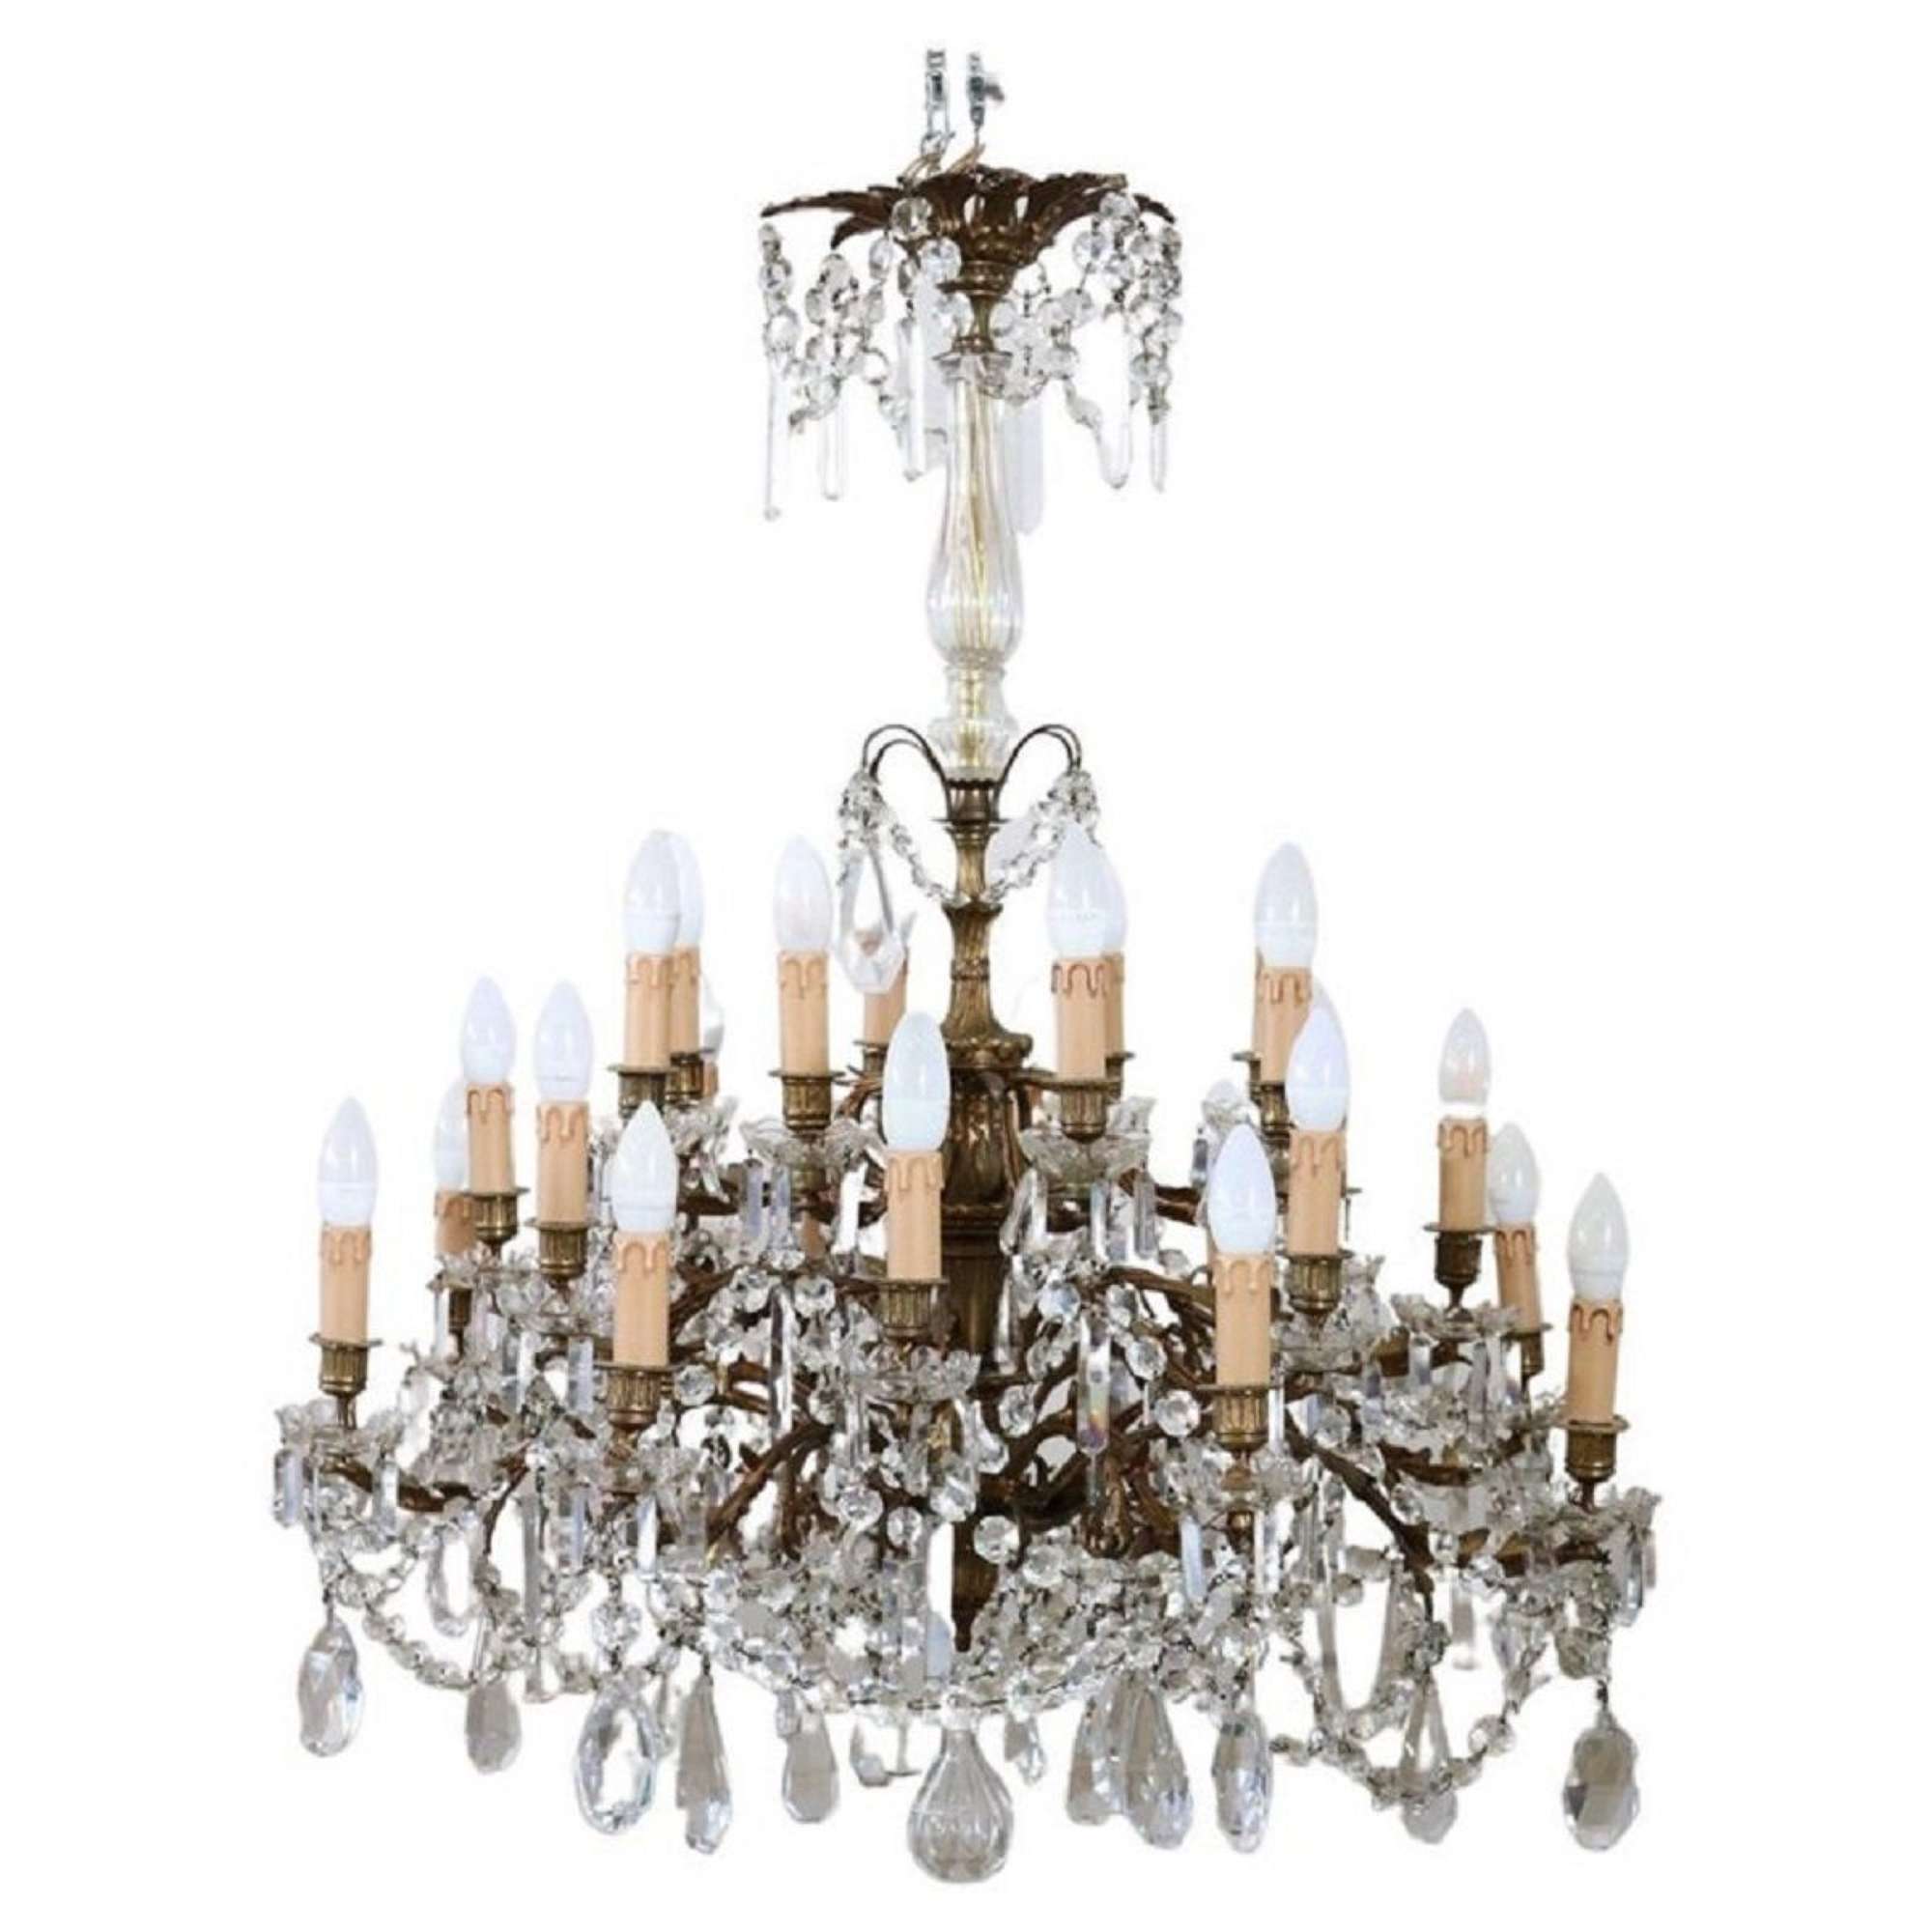 Large Antique Bronze And Crystal Chandelier With 24 Bulbs